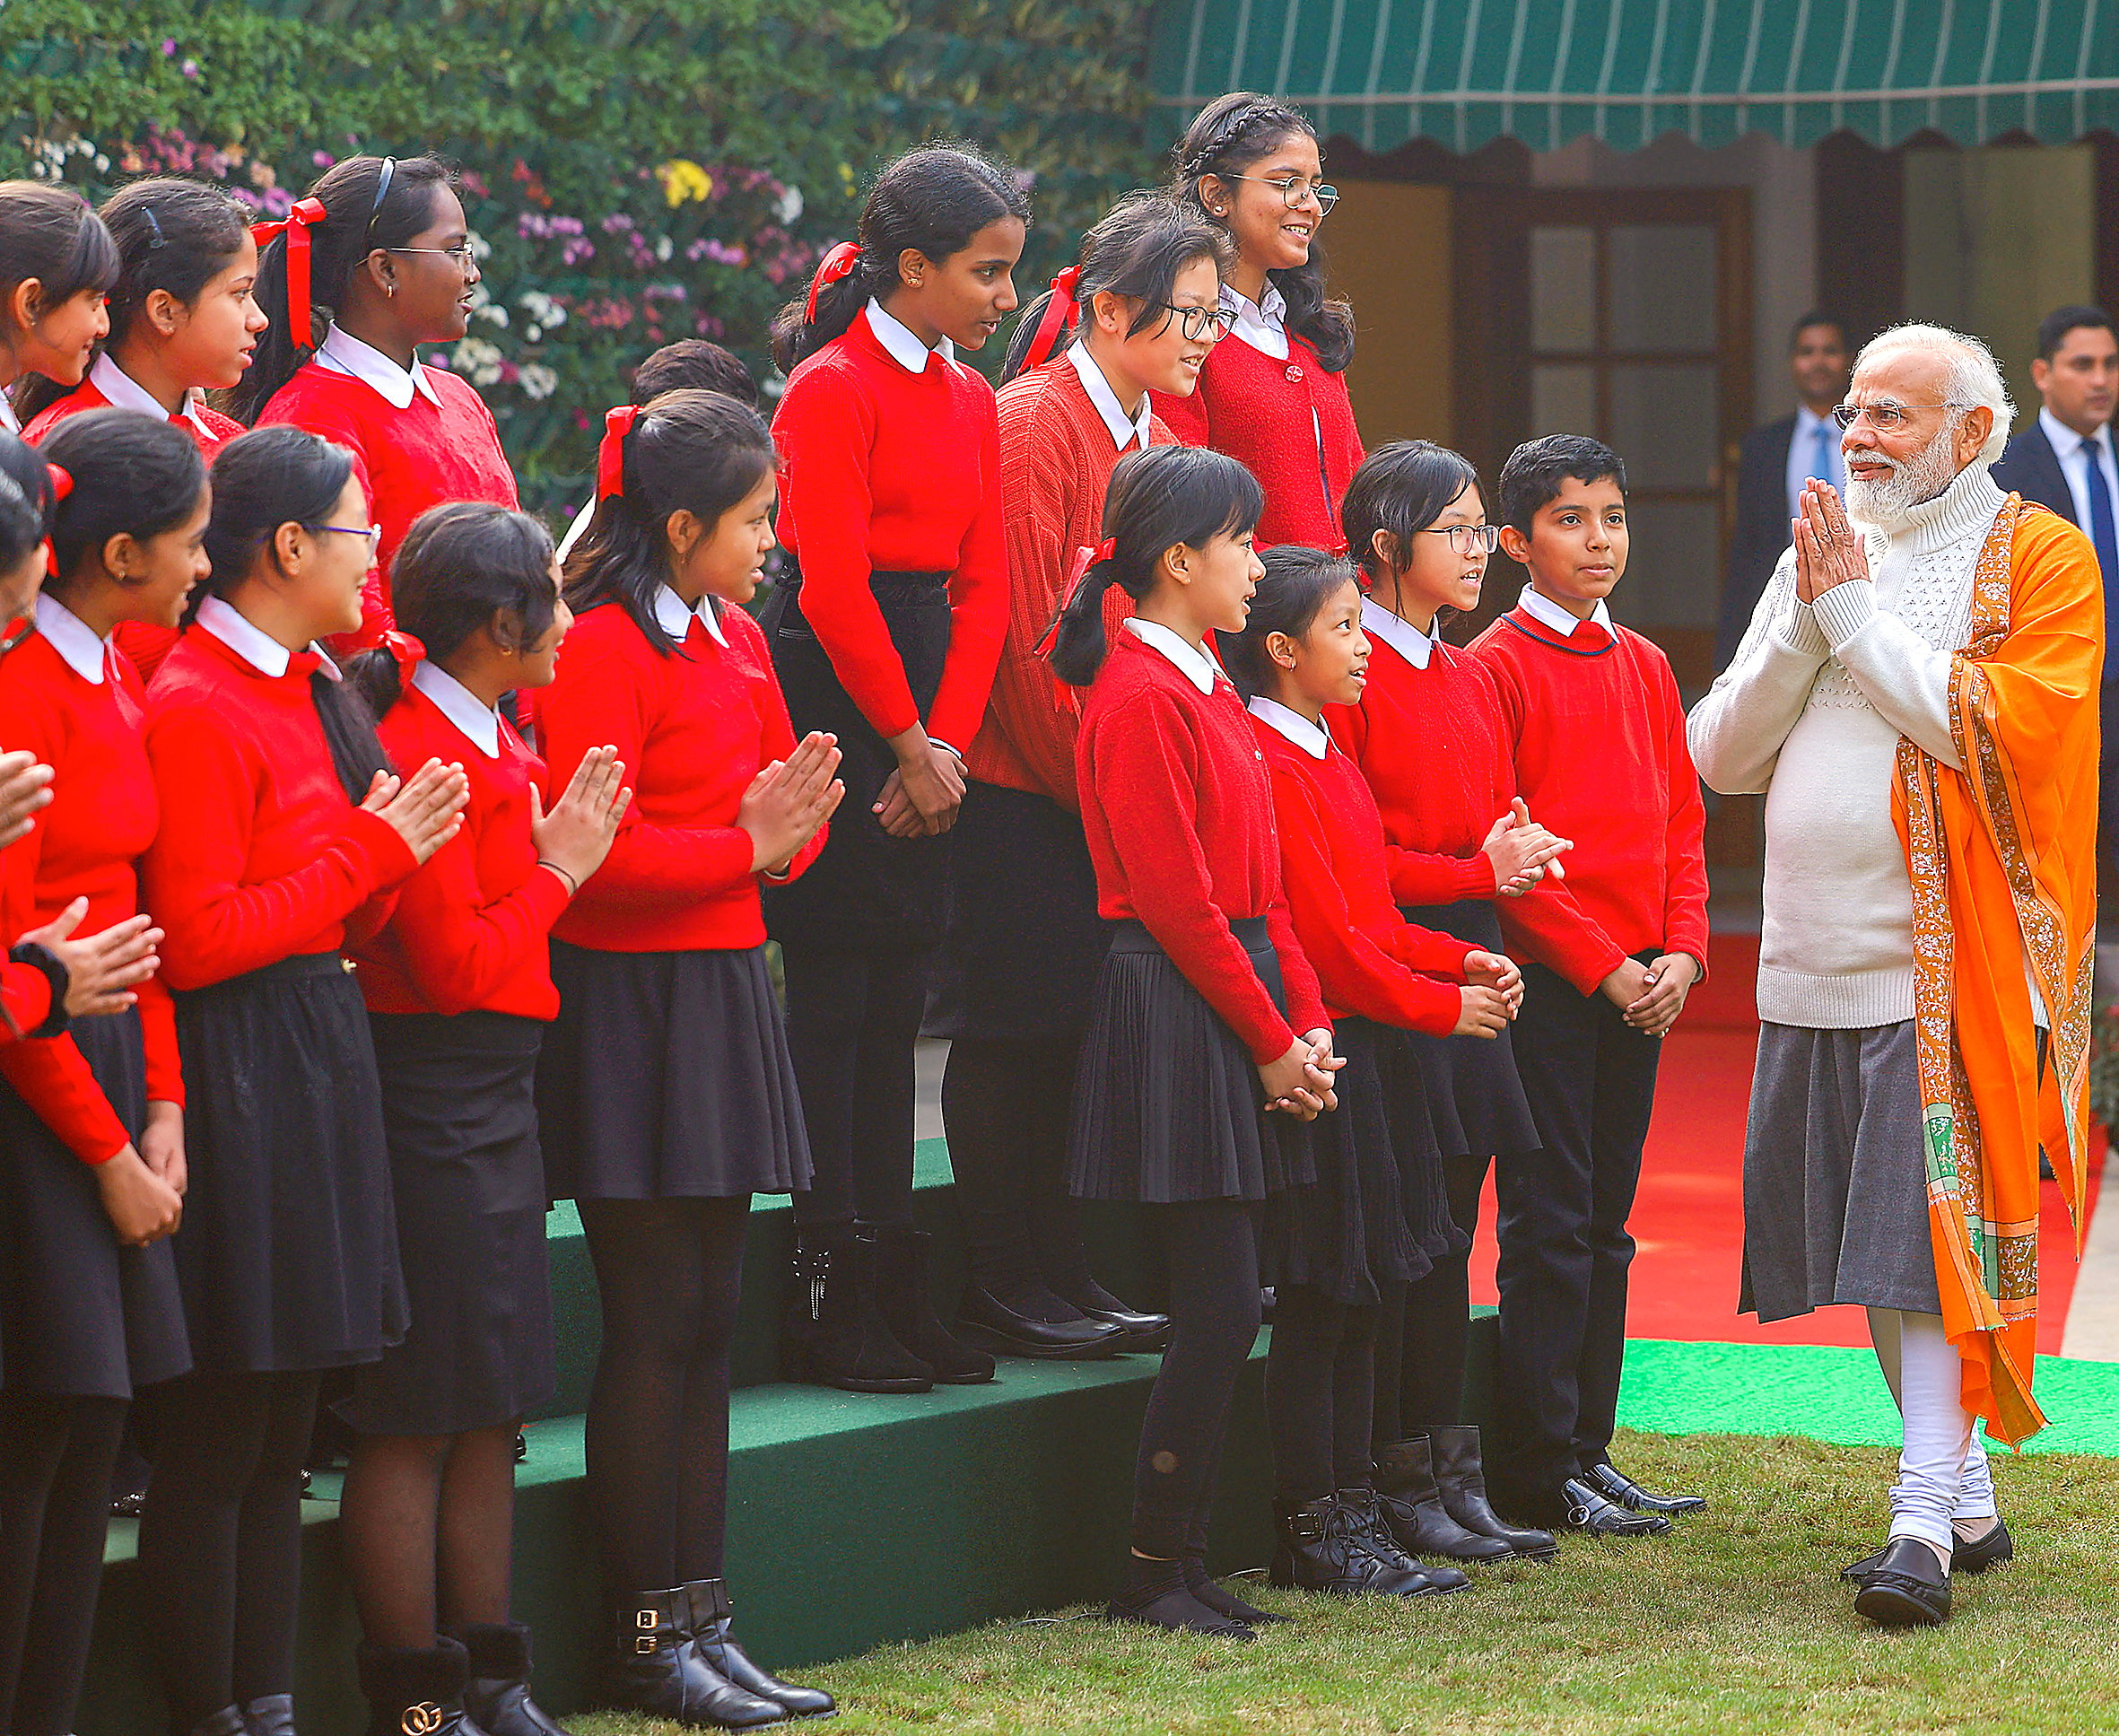 PM Modi being welcomed by children during the event.